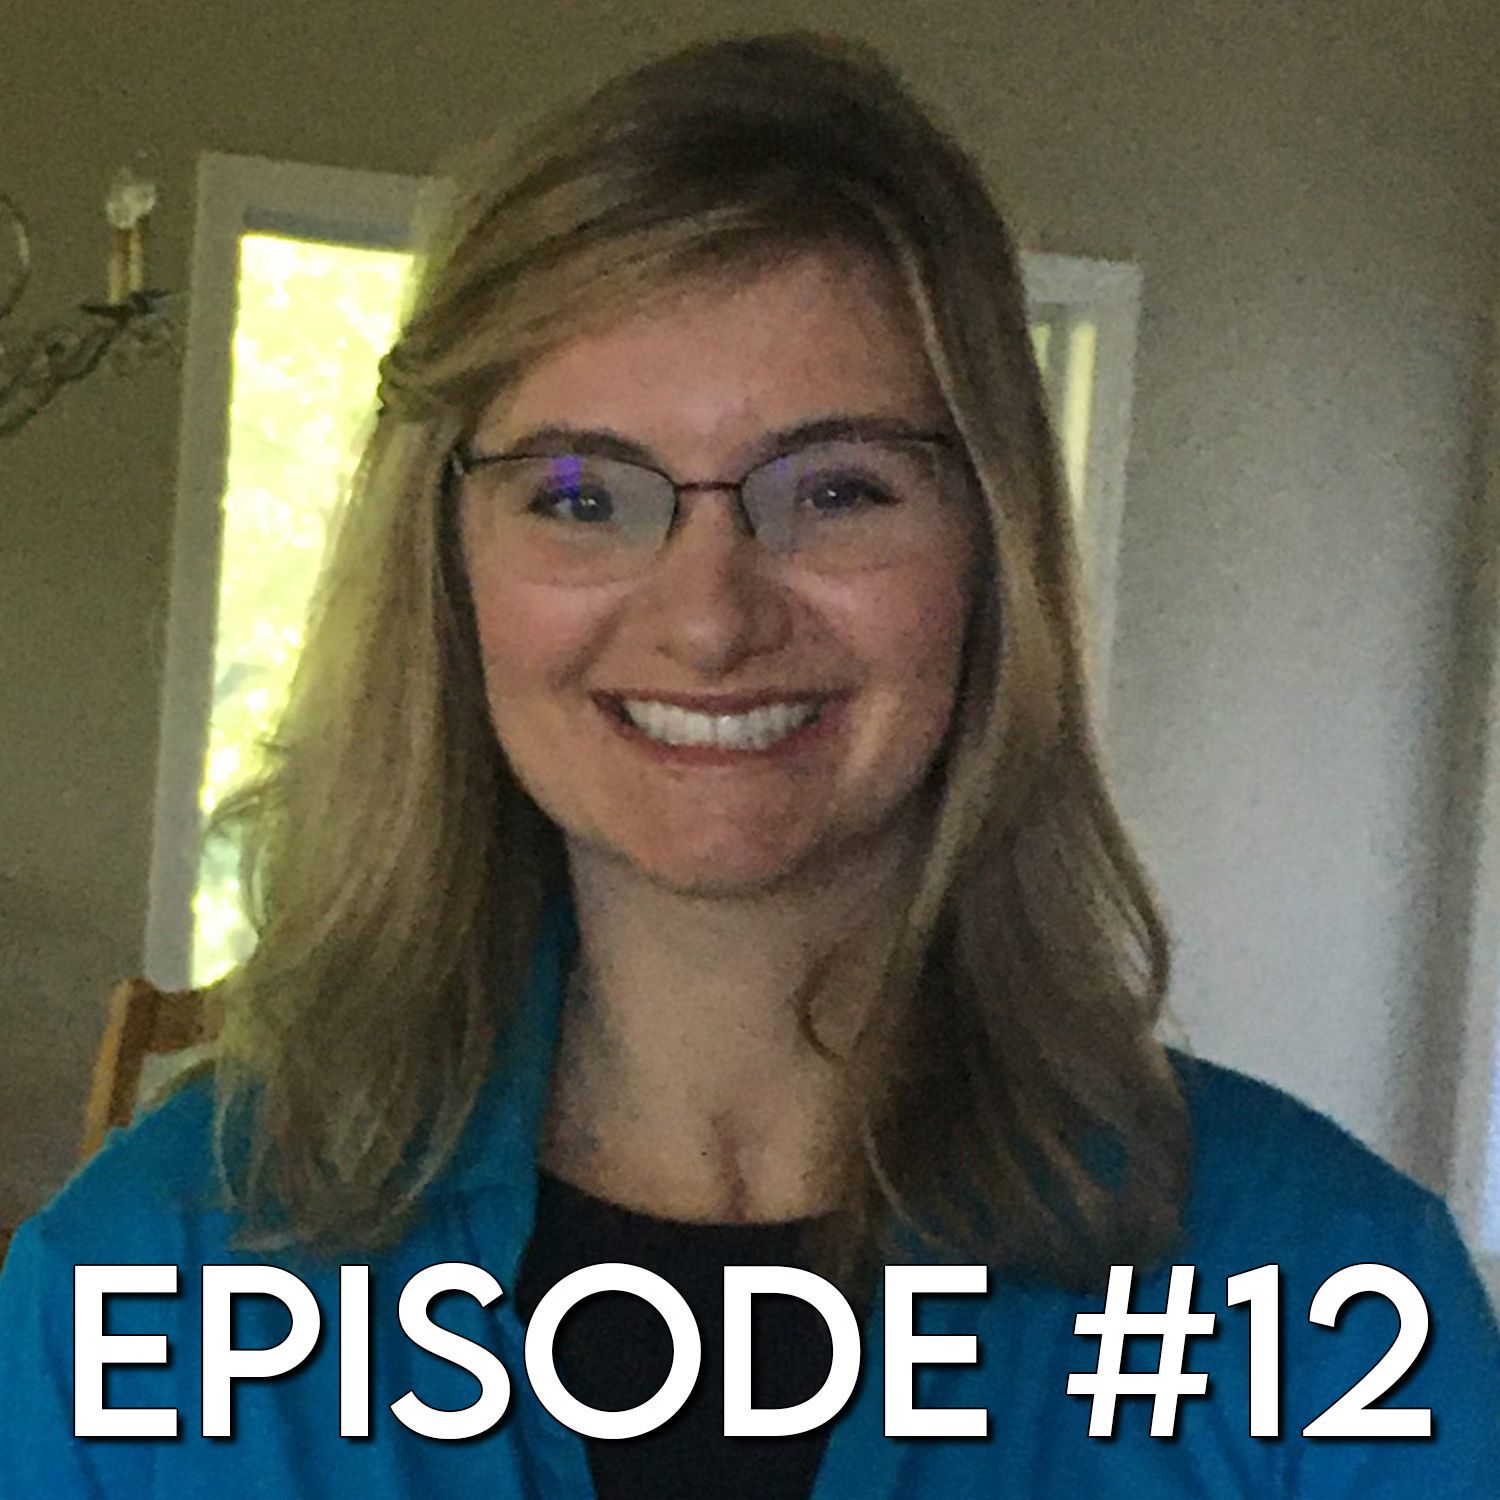 Episode #12 - Lauren Taylor: Recovering with Horses